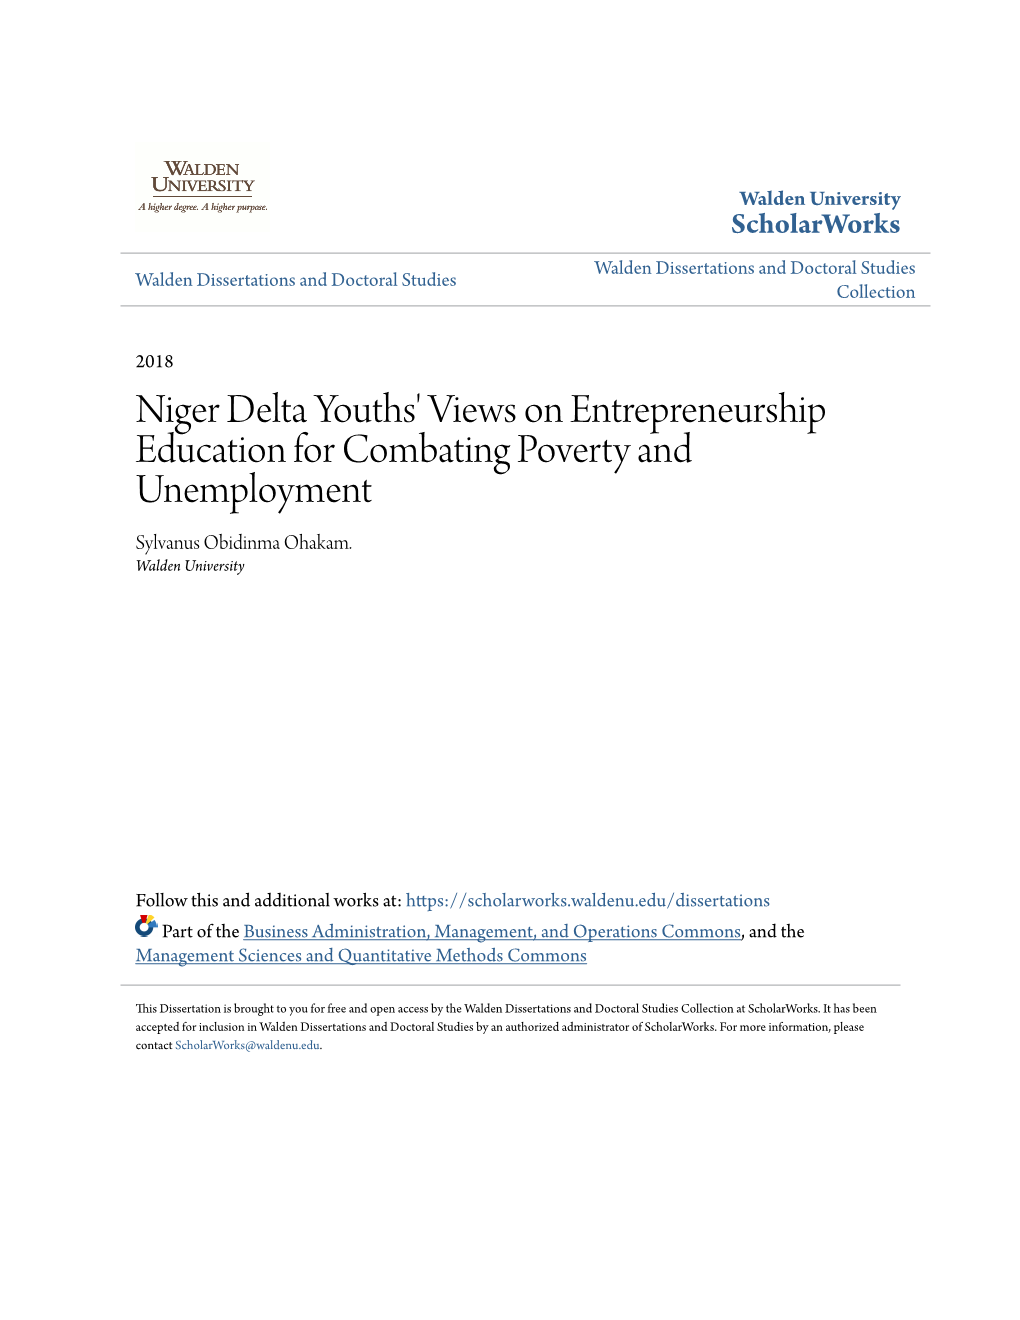 Niger Delta Youths' Views on Entrepreneurship Education for Combating Poverty and Unemployment Sylvanus Obidinma Ohakam